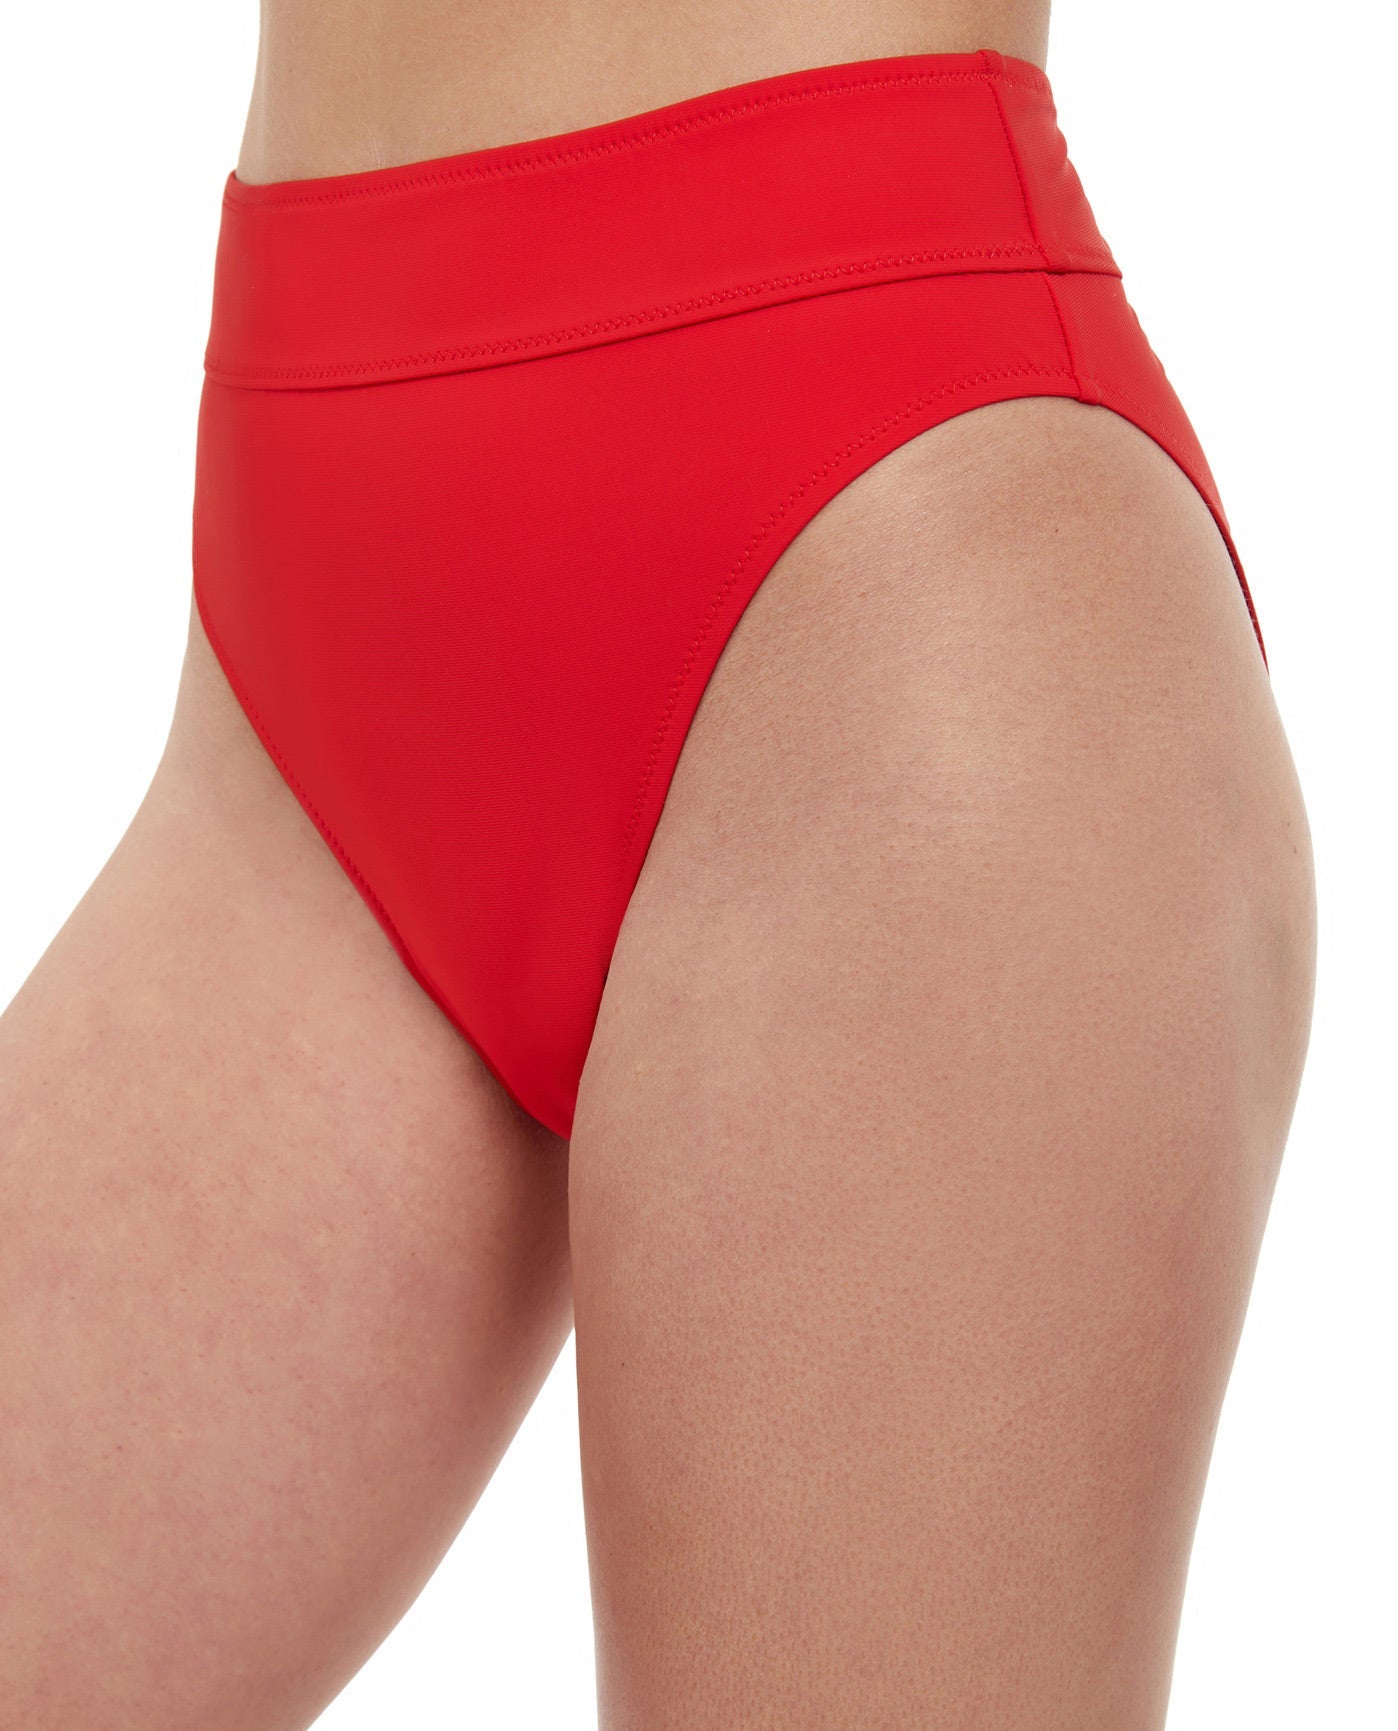 Side View View Of Free Sport Ultimate Wave Full Coverage Bikini Bottom | FREE SPORT ULTIMATE WAVE RED